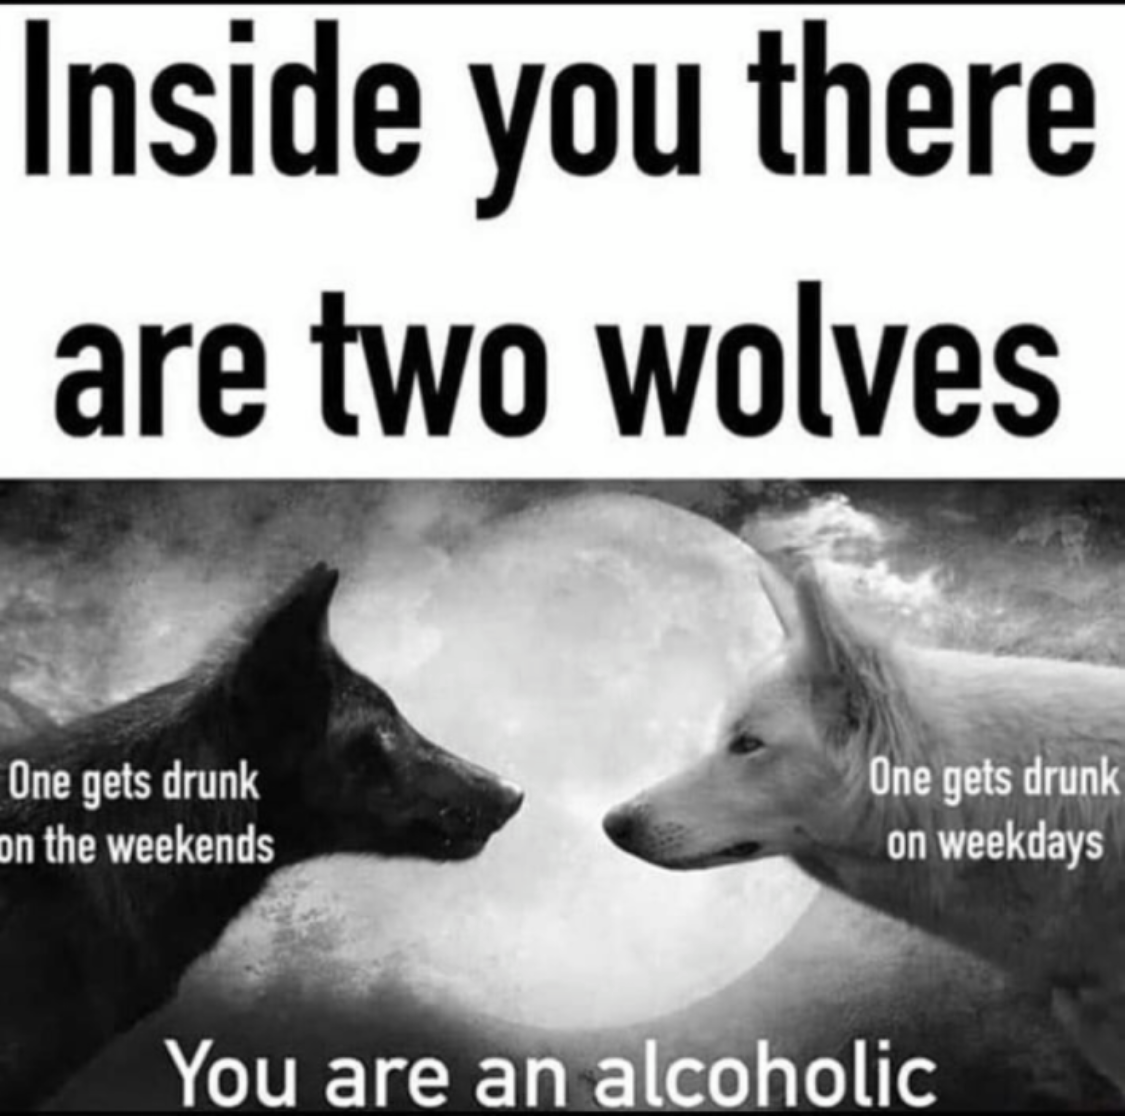 photo caption - Inside you there are two wolves One gets drunk pn the weekends One gets drunk on weekdays You are an alcoholic